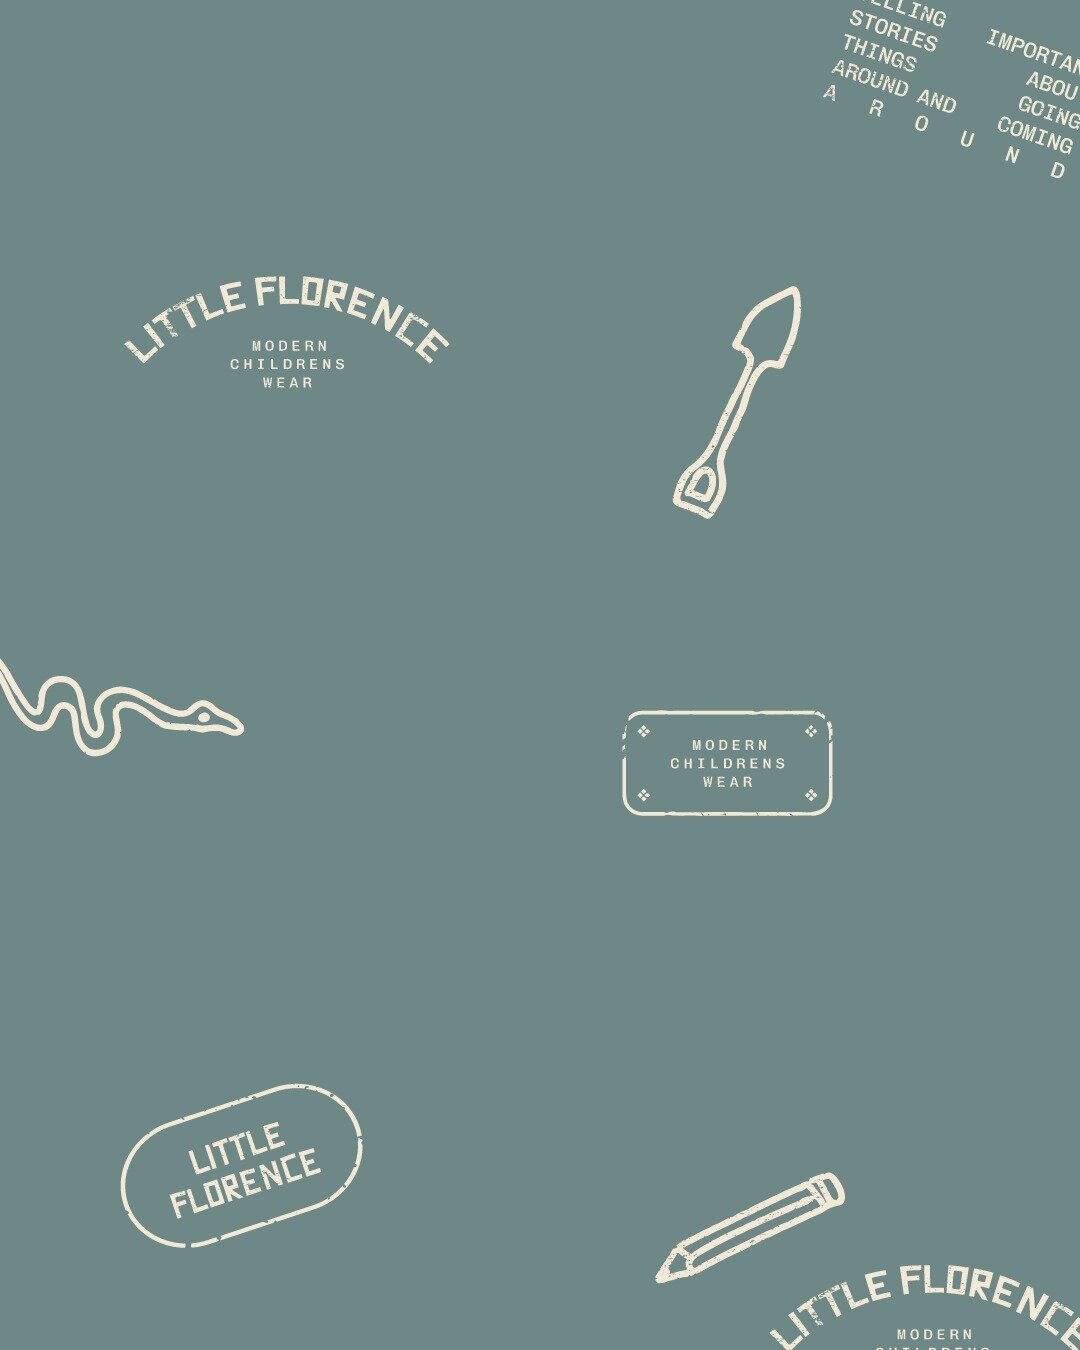 02/06 - BRAND LAUNCH FOR @discoverlittleflorence 

Bespoke illustrations and logo stamps